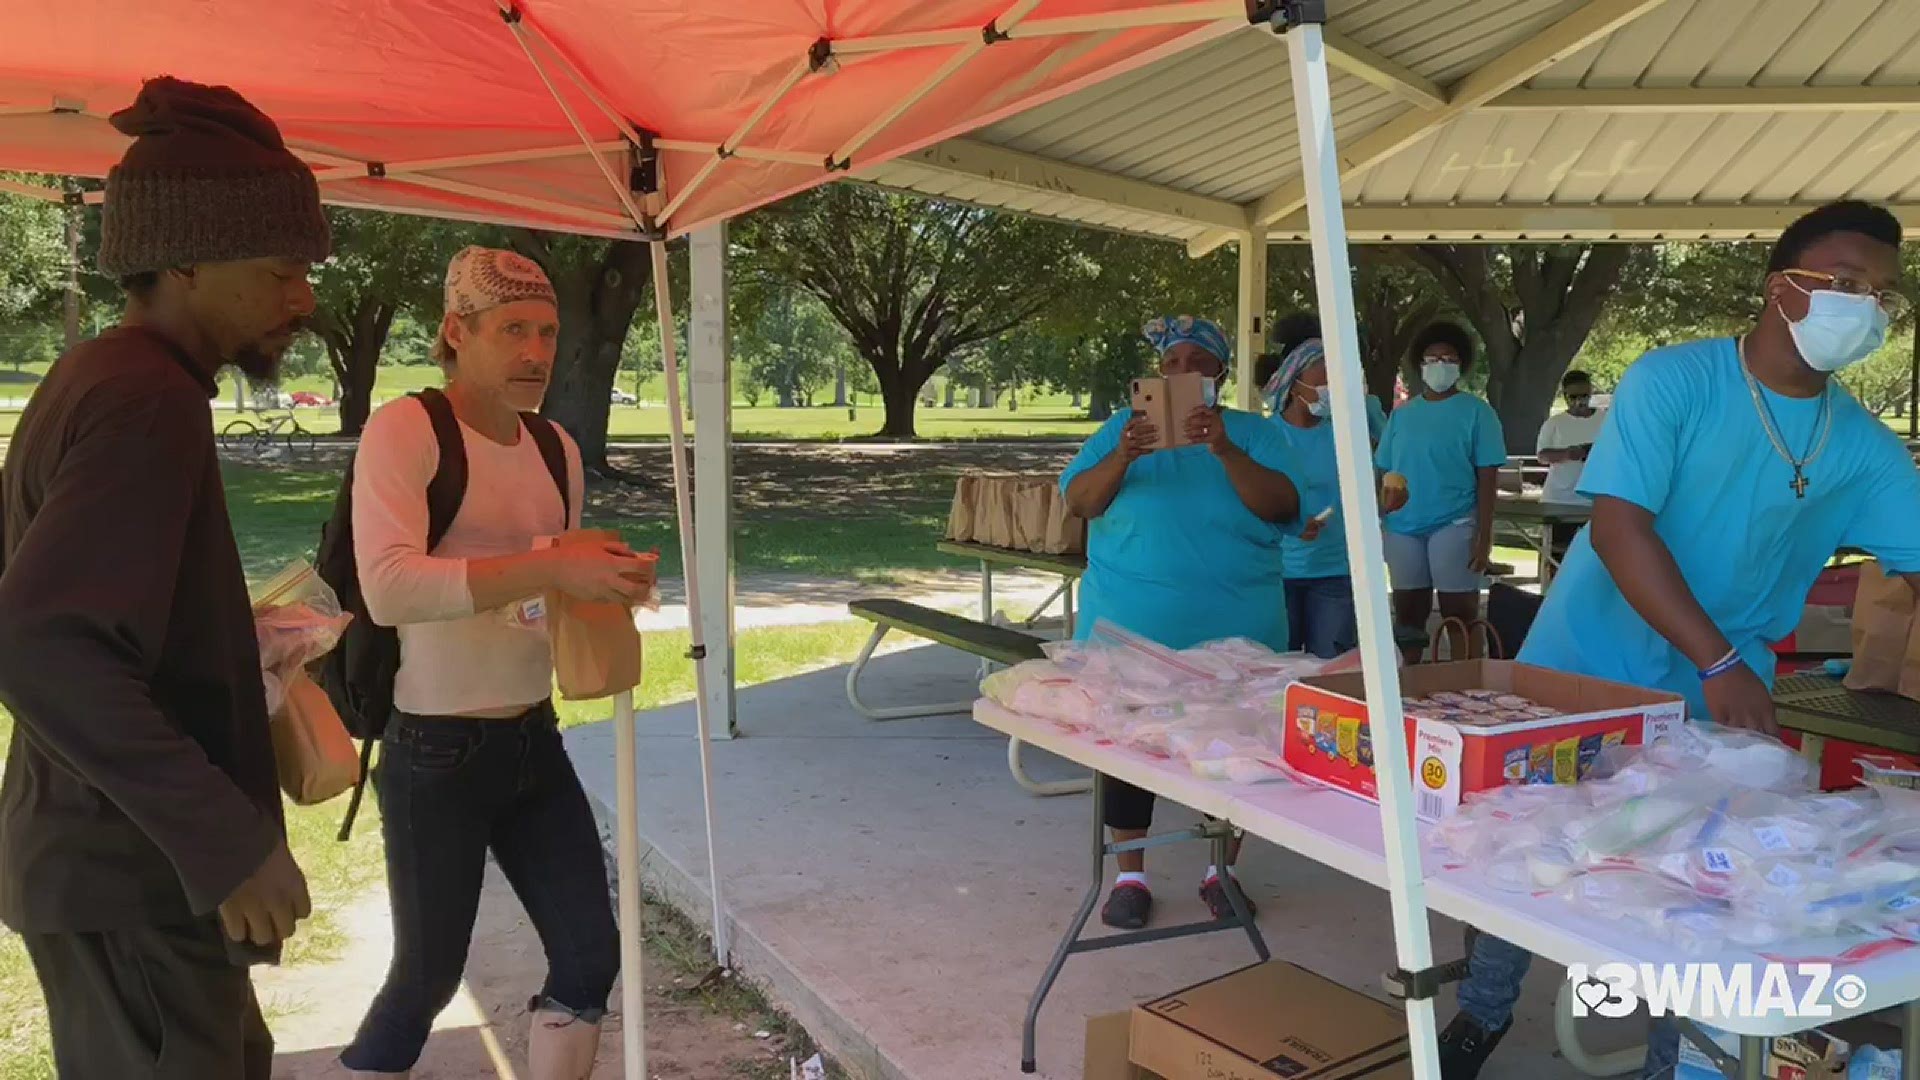 Teen feeds the homeless in Central City Park